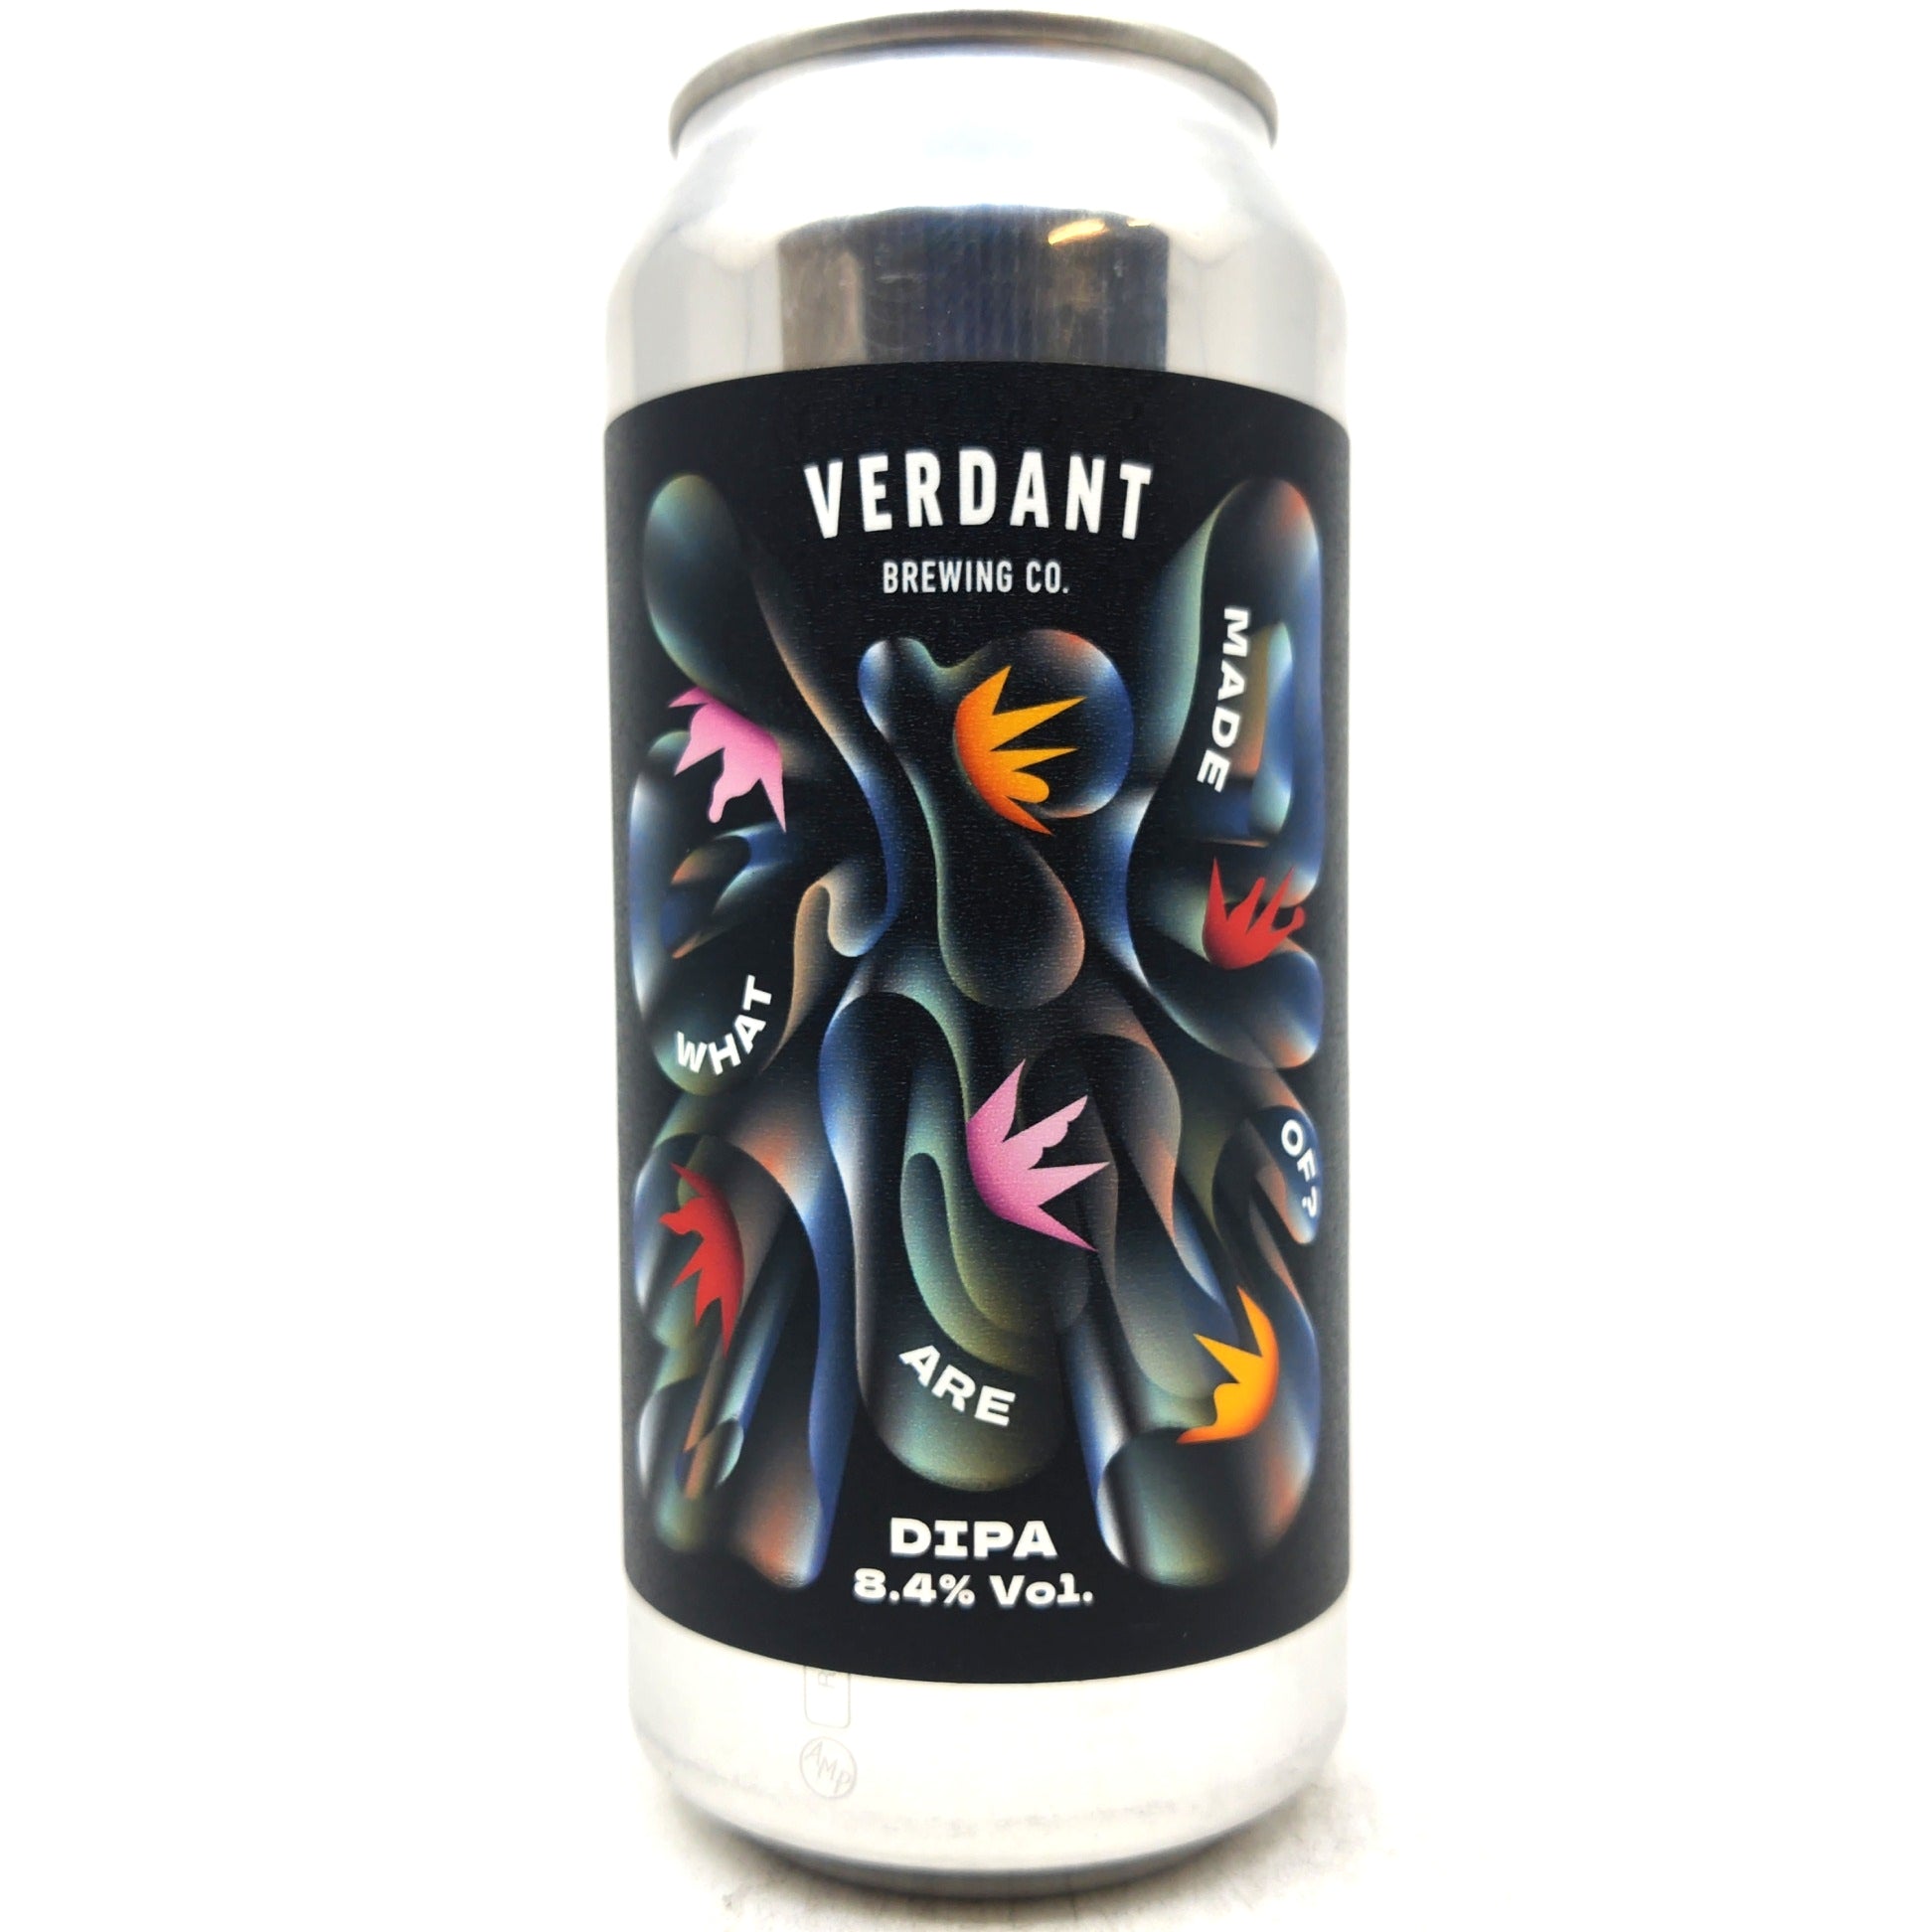 Verdant What Are Dreams Made Of Double IPA 8.4% (440ml can)-Hop Burns & Black